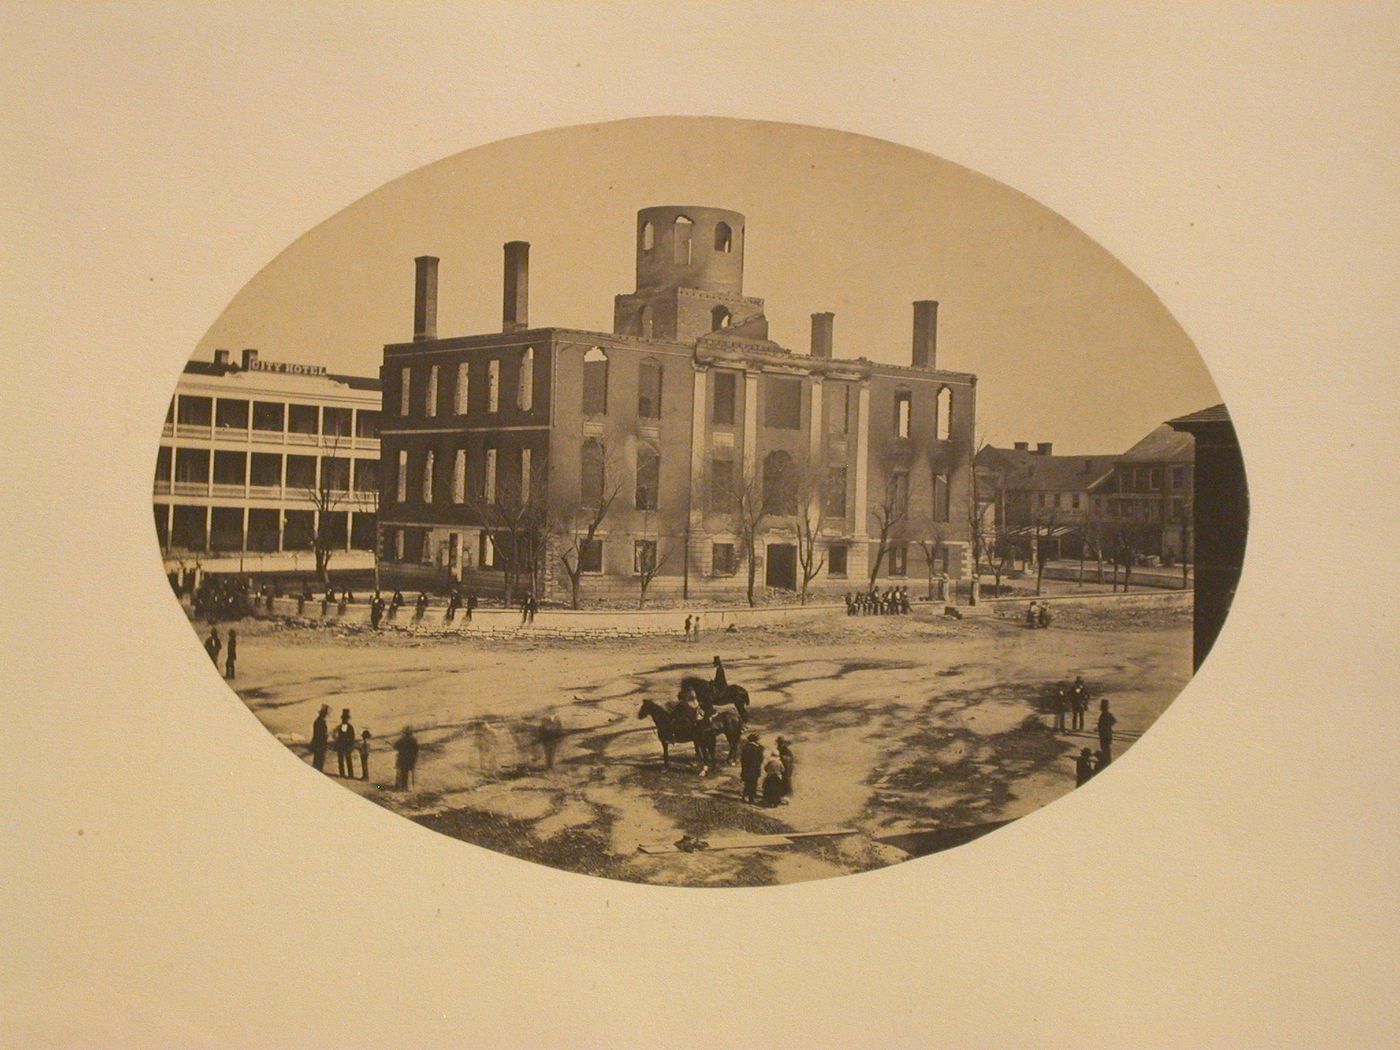 View of the Davidson County Courthouse destroyed by fire, Nashville, Tennessee